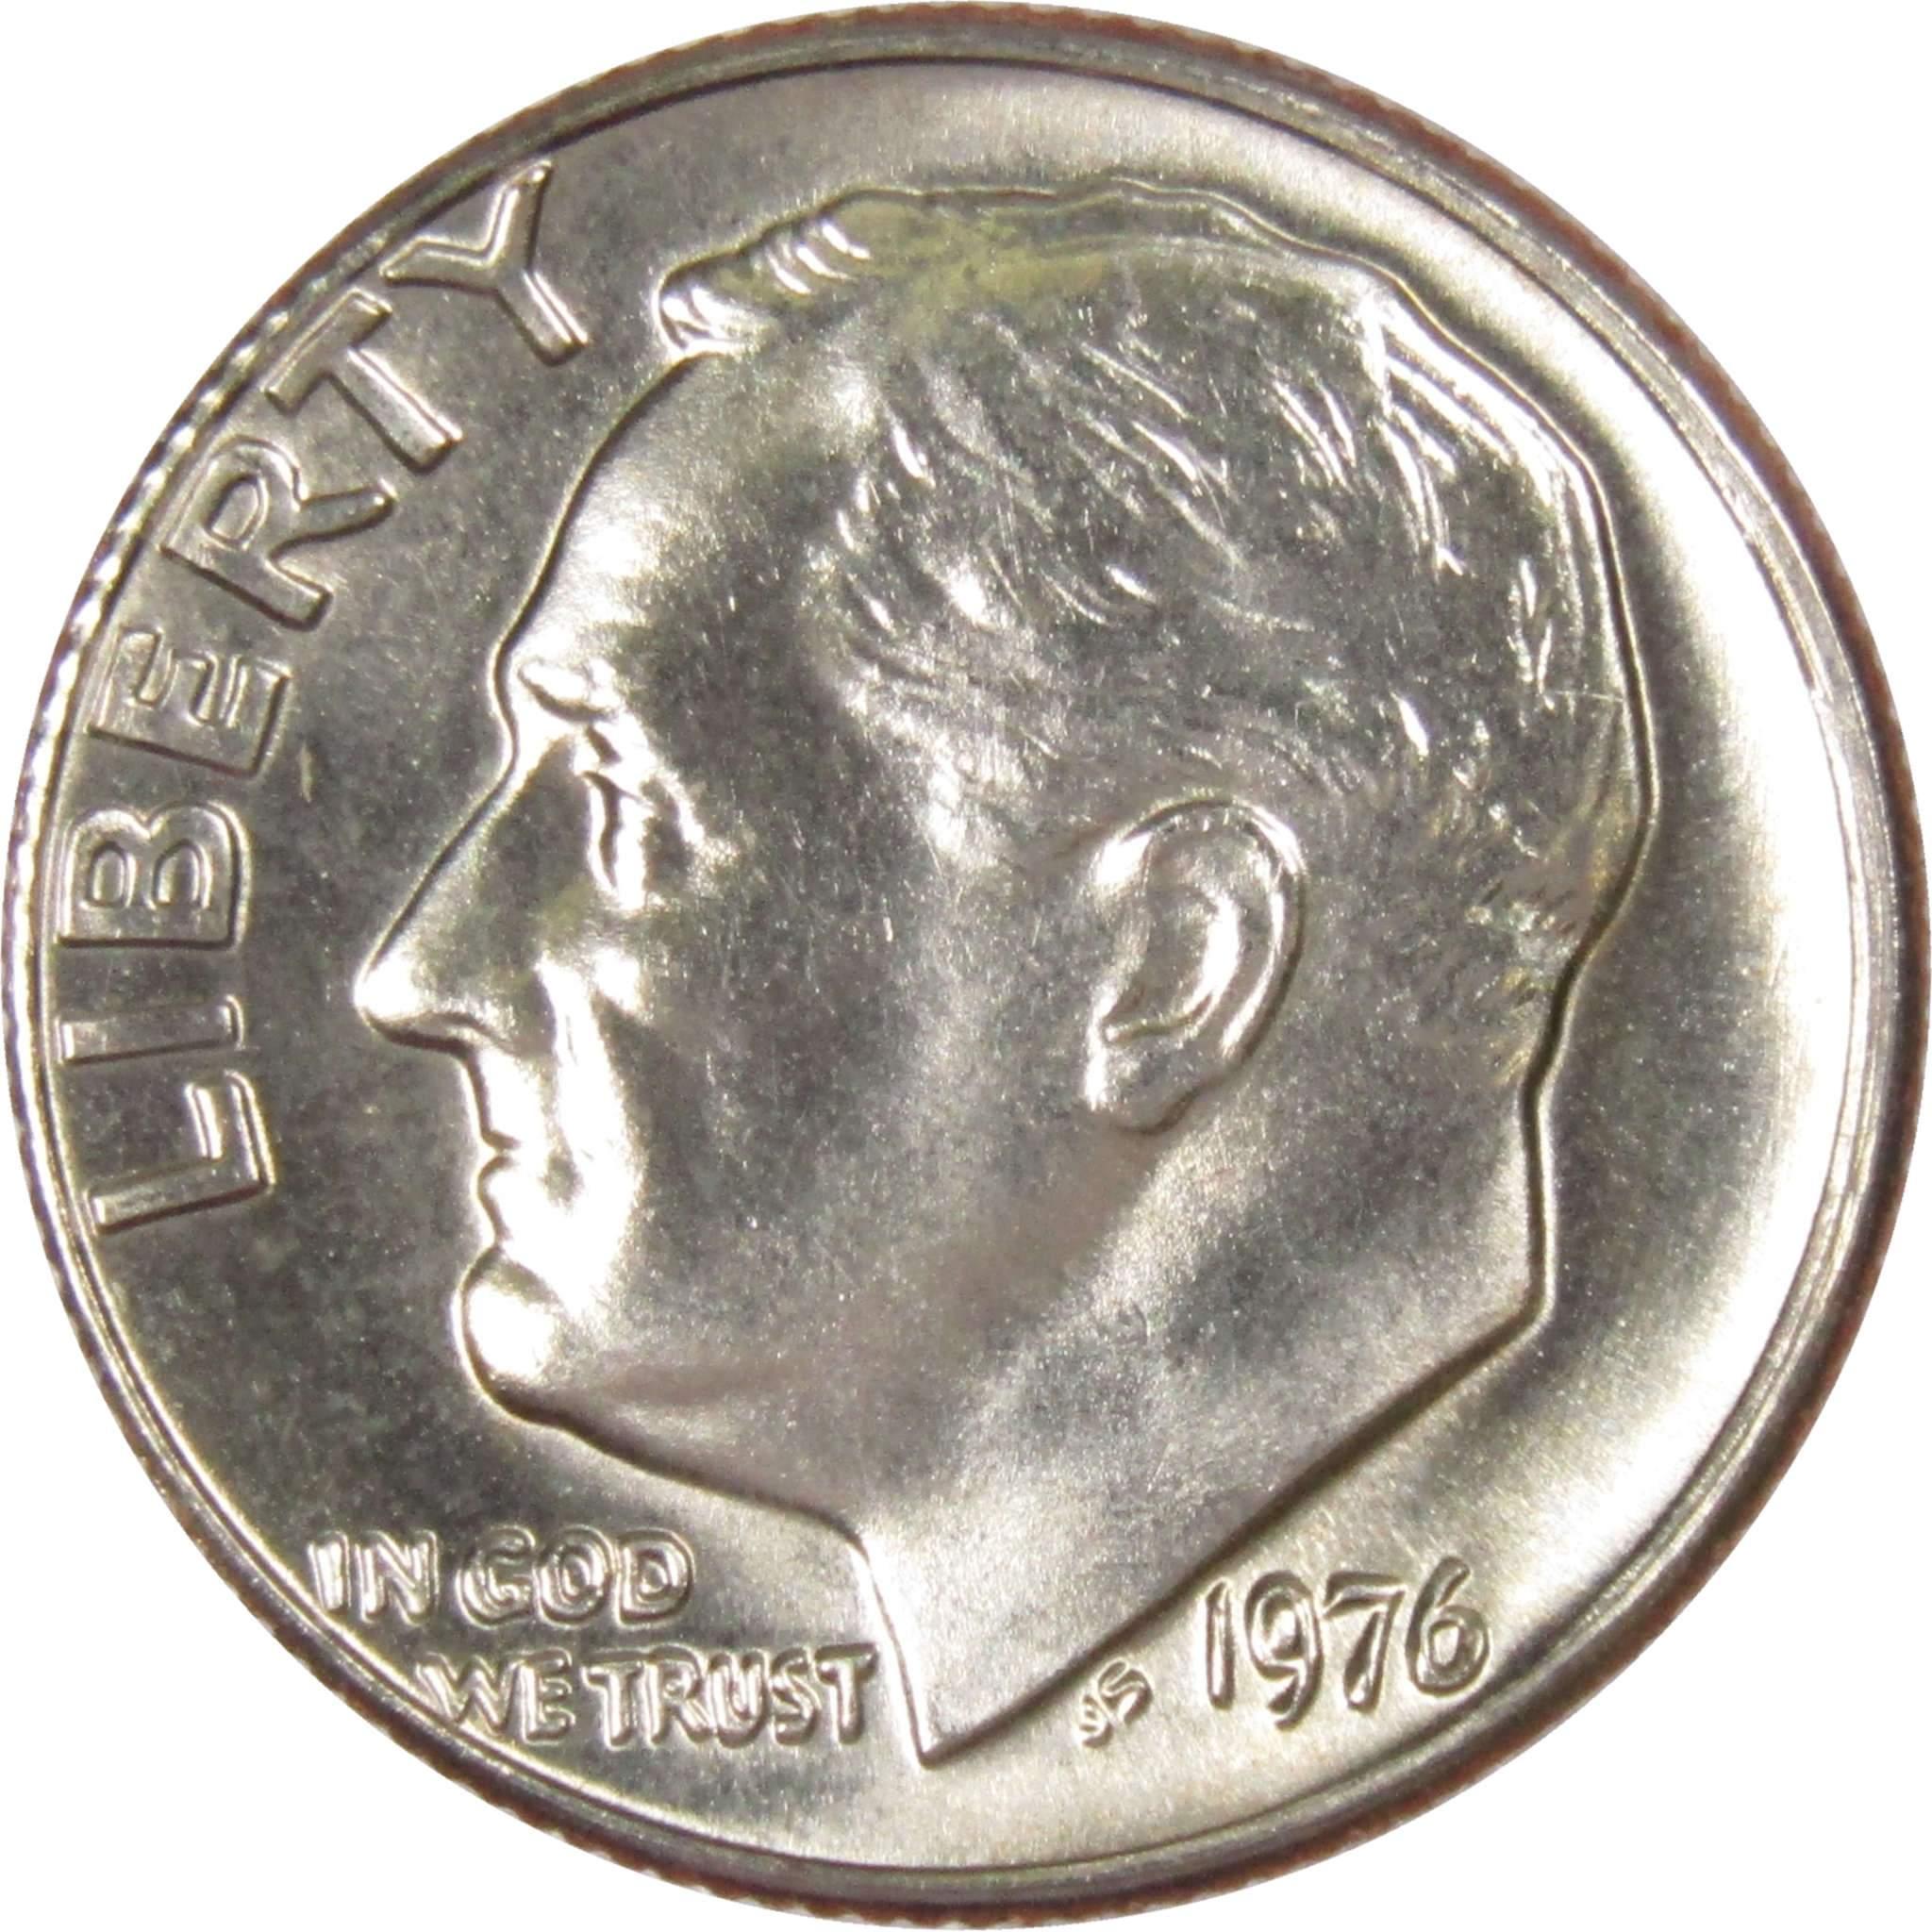 1976 Roosevelt Dime BU Uncirculated Mint State 10c US Coin Collectible